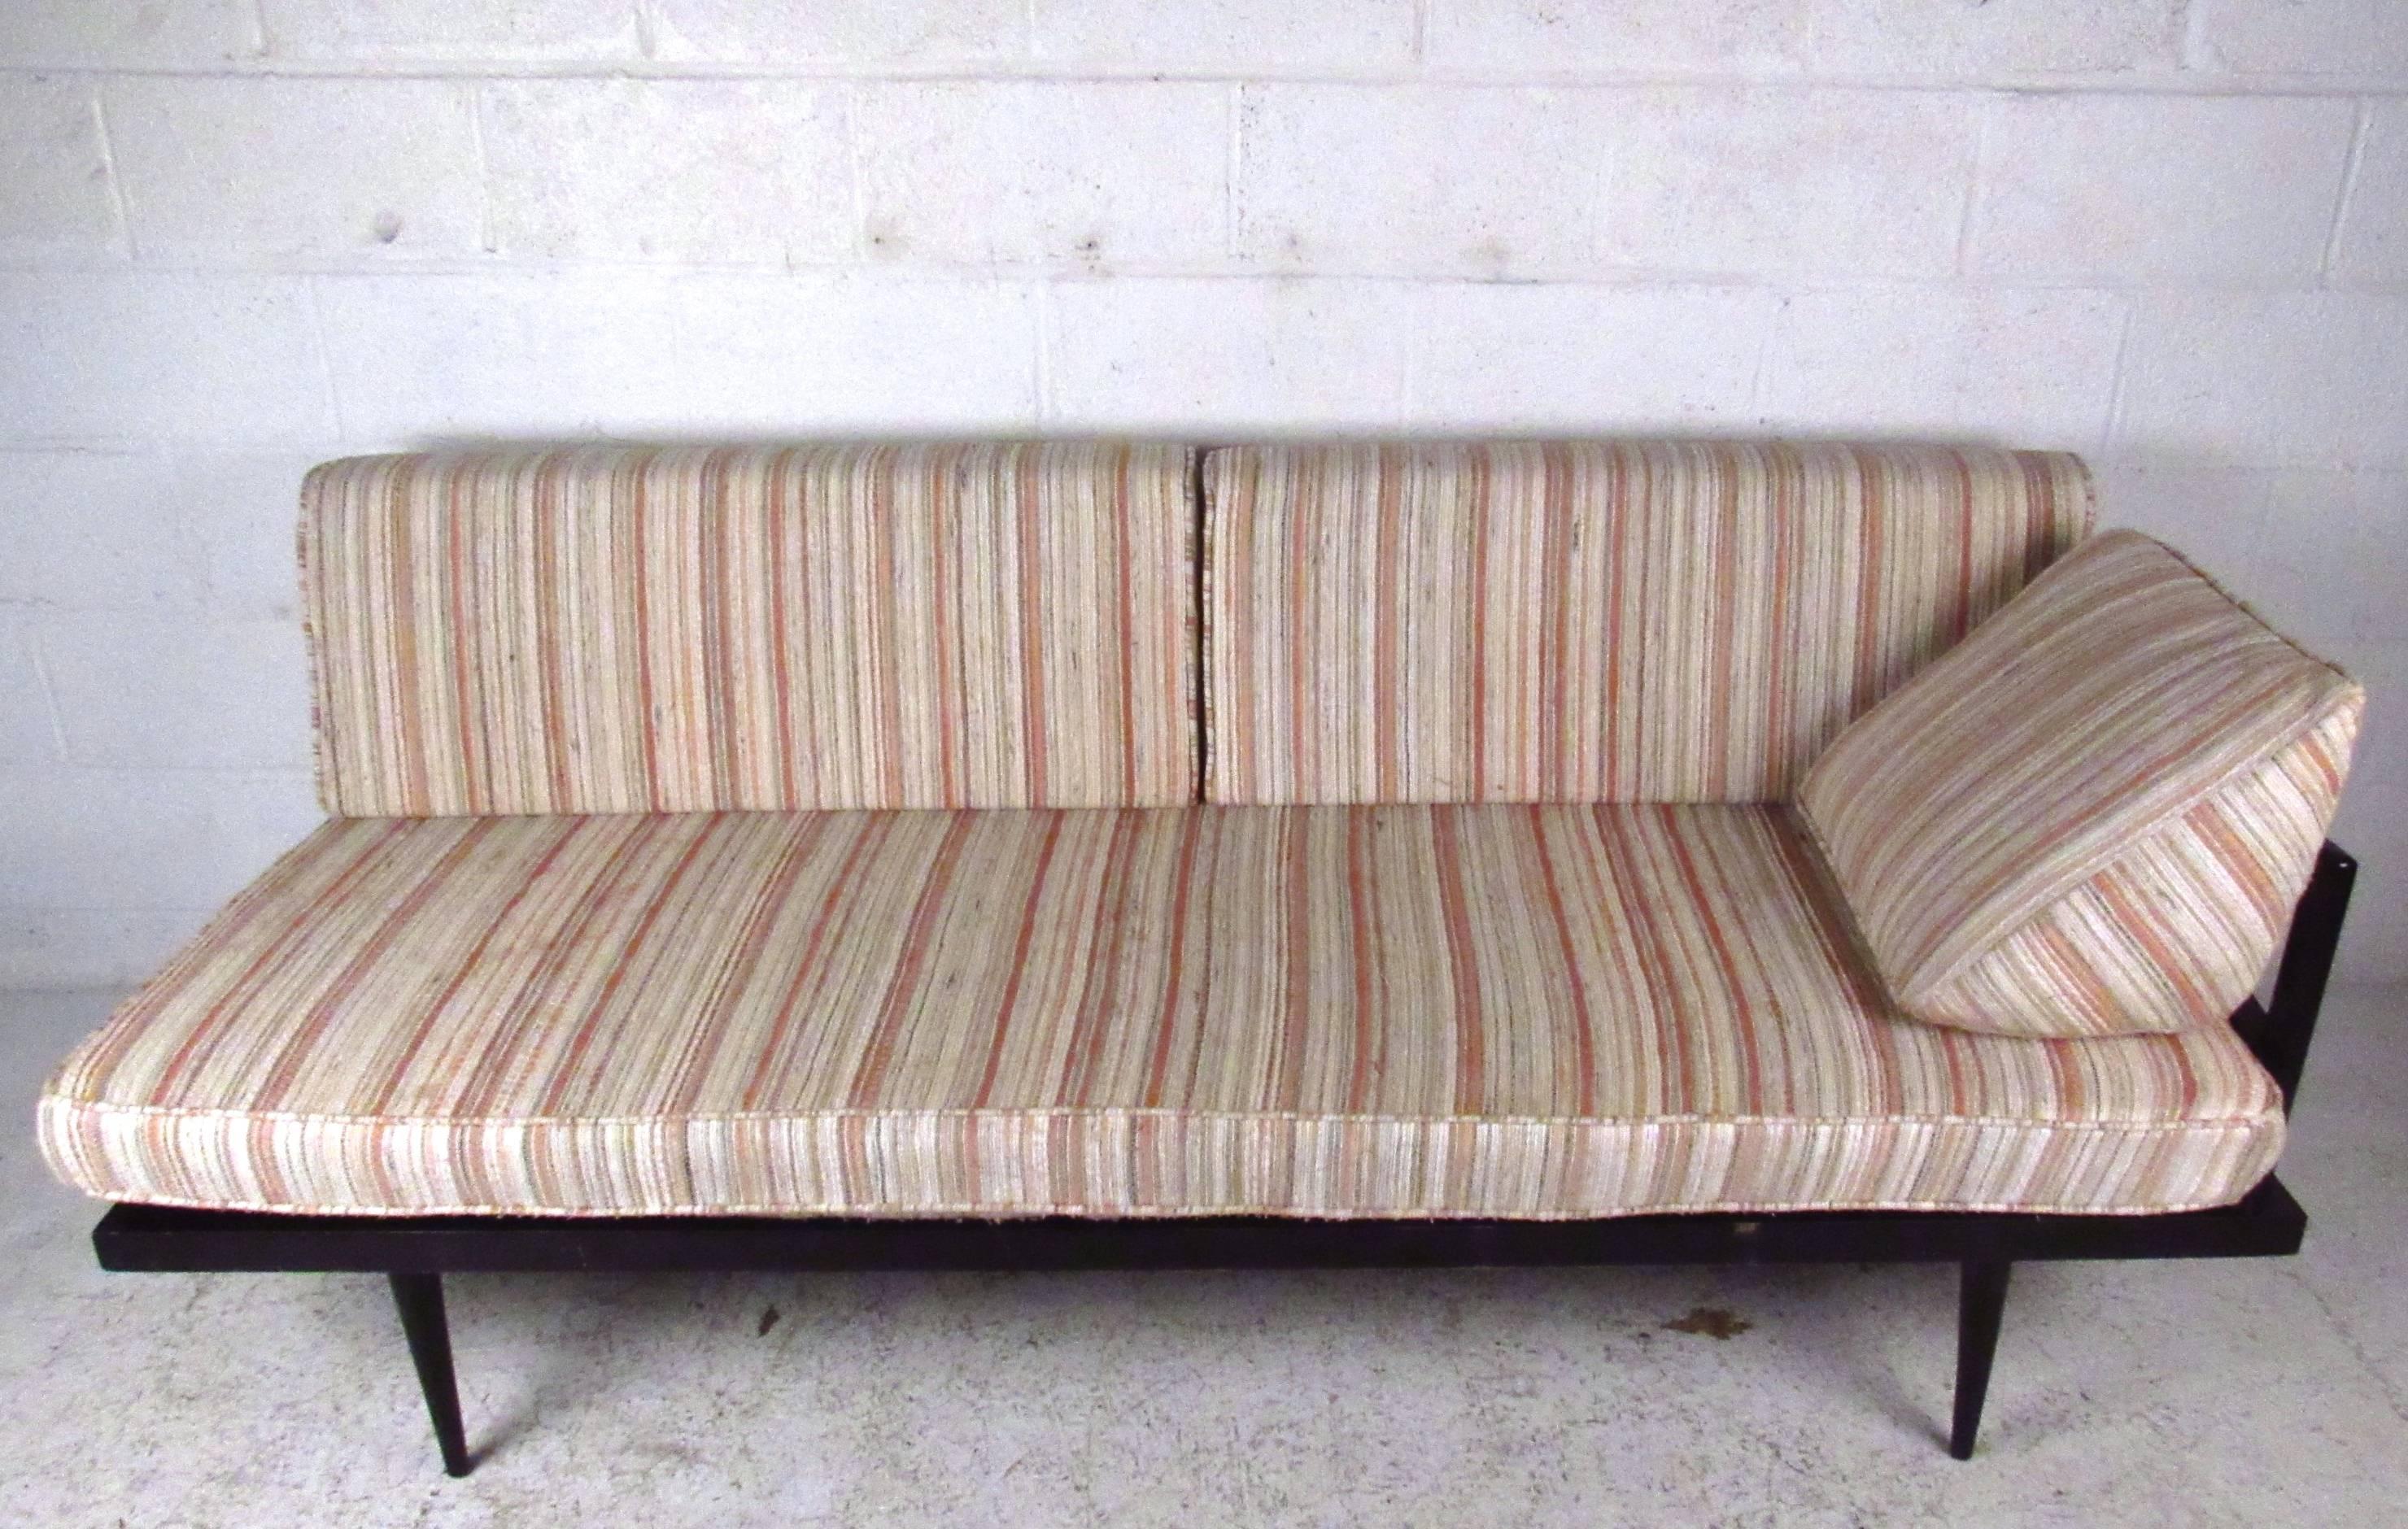 Beautiful vintage daybed features tapered legs, lacquered finish, and sculpted single arm rest. Wedge shaped cushion makes this a comfortable option for laying out or for casual seating. Please confirm item location (NY or NJ). 